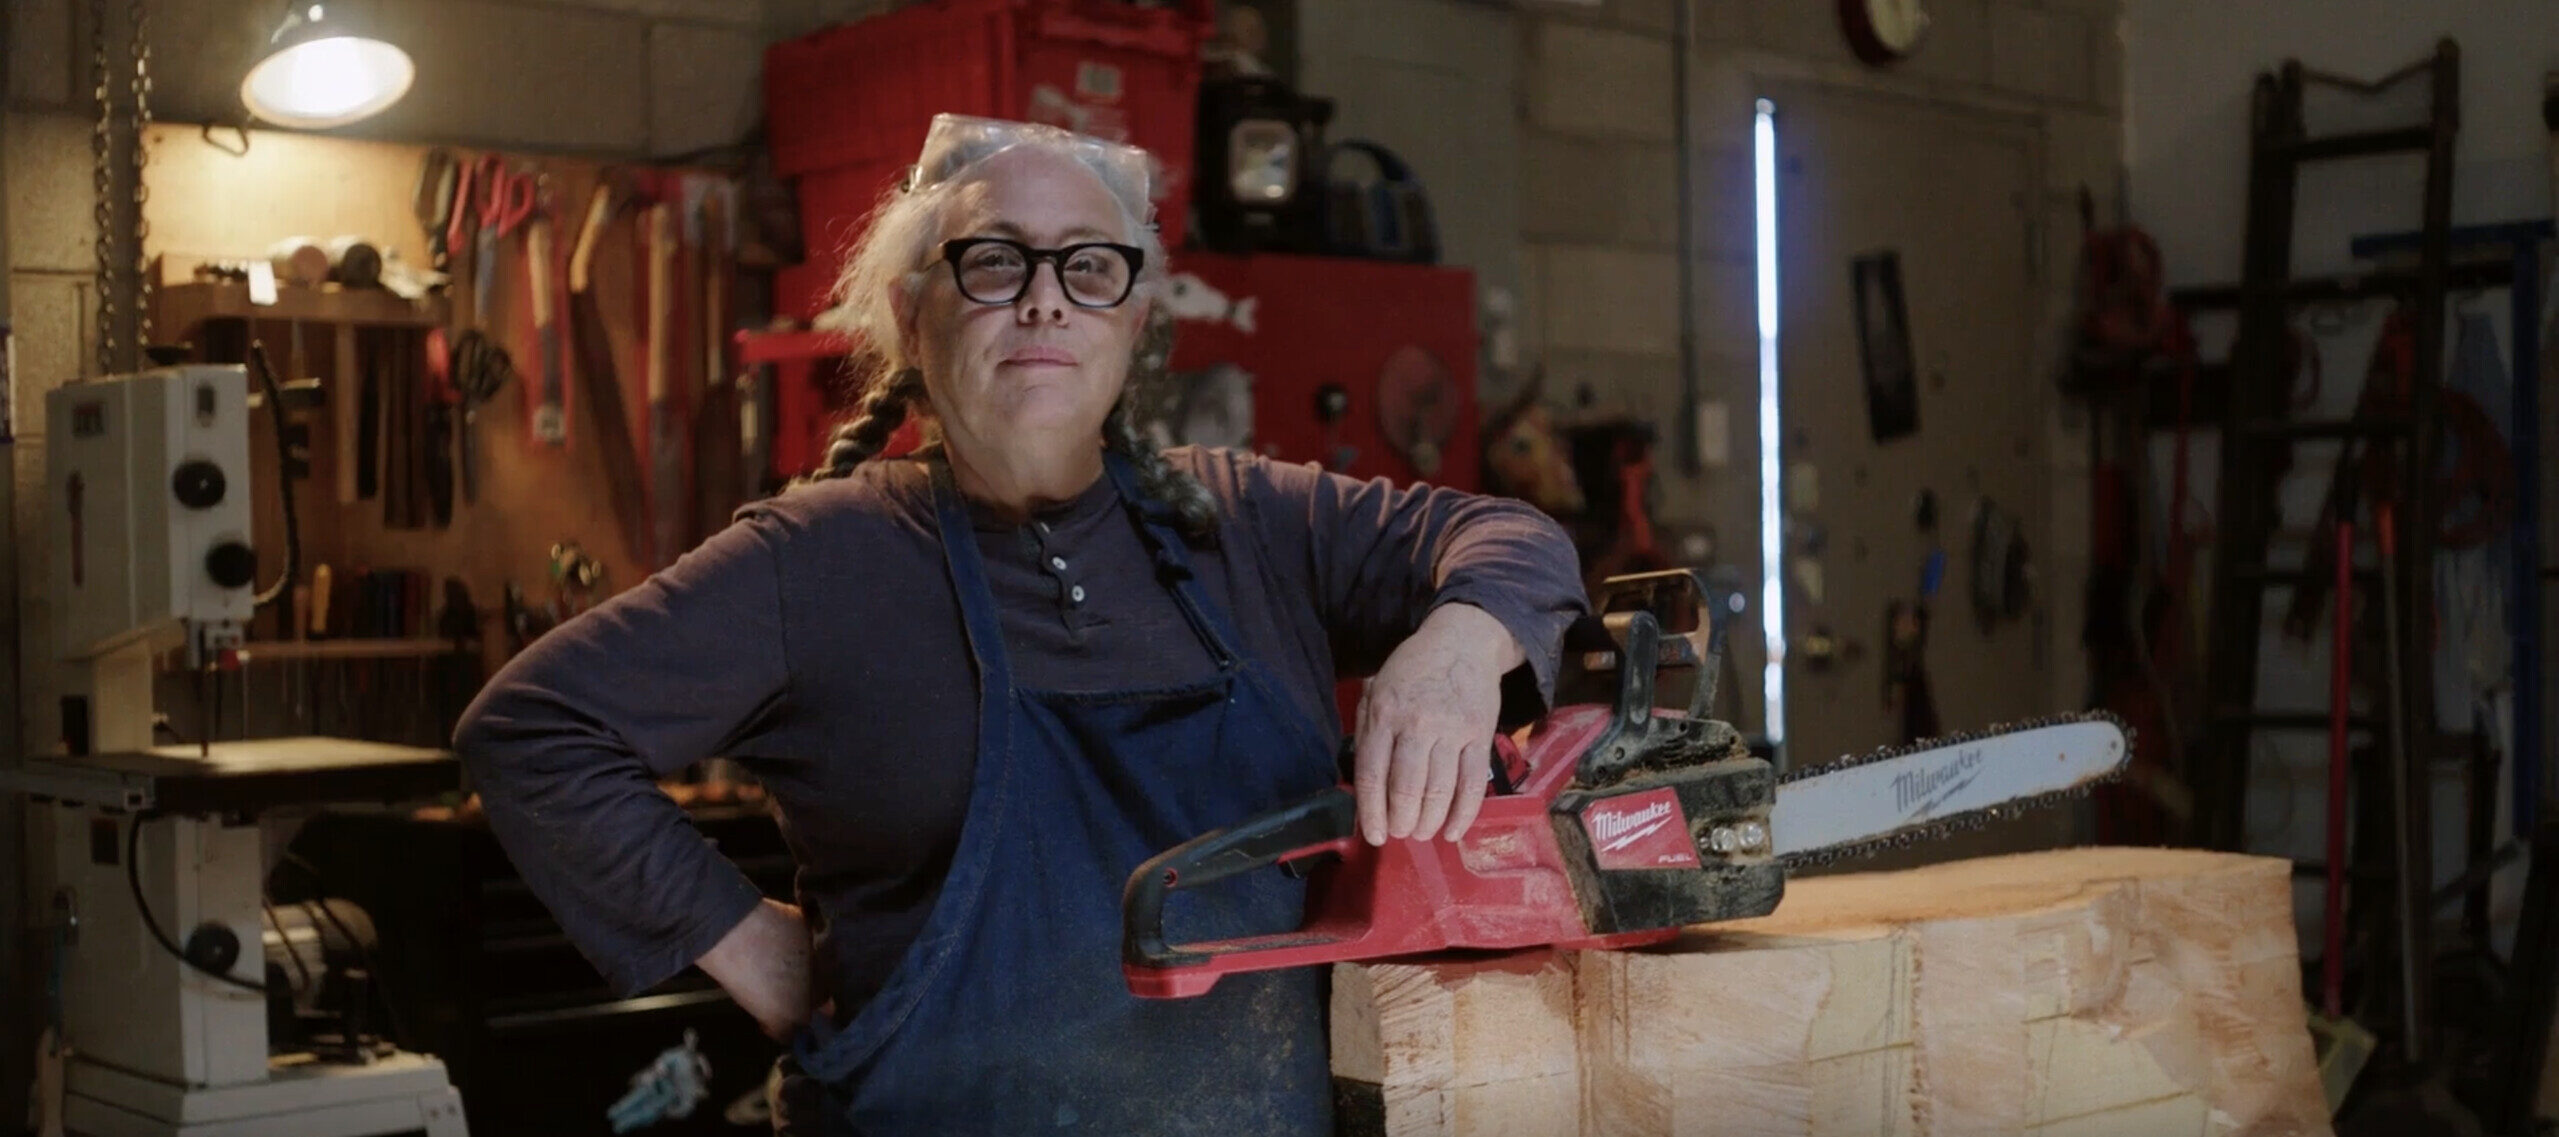 A woman with medium-light skin tone, gray pigtails, large black glasses, a dark long-sleeve shirt and a navy apron stands proudly looking at the camera in a wood shop artist studio. Both her arms are bent, one at her waist and the other leaning on a chainsaw that rests on a large piece of wood on a table.